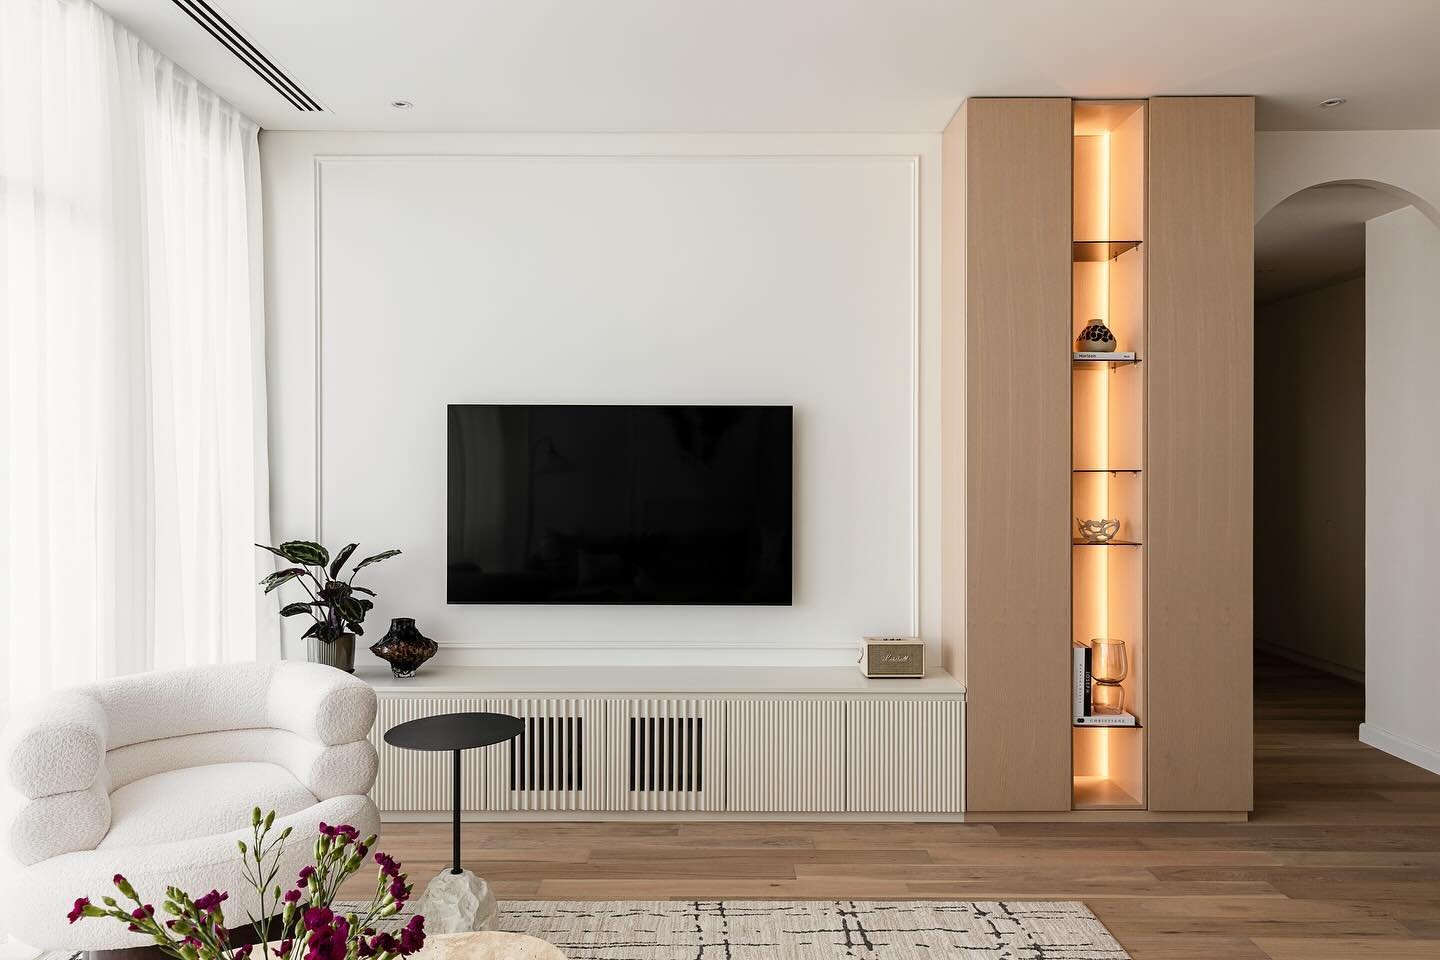 Experience the ultimate blend of style and functionality with our custom-designed TV unit. Featuring mood-enhancing LED lighting, sleek slatted doors for your receivers, and seamless hidden wiring. 

We love the perfect balance of functionality &amp;